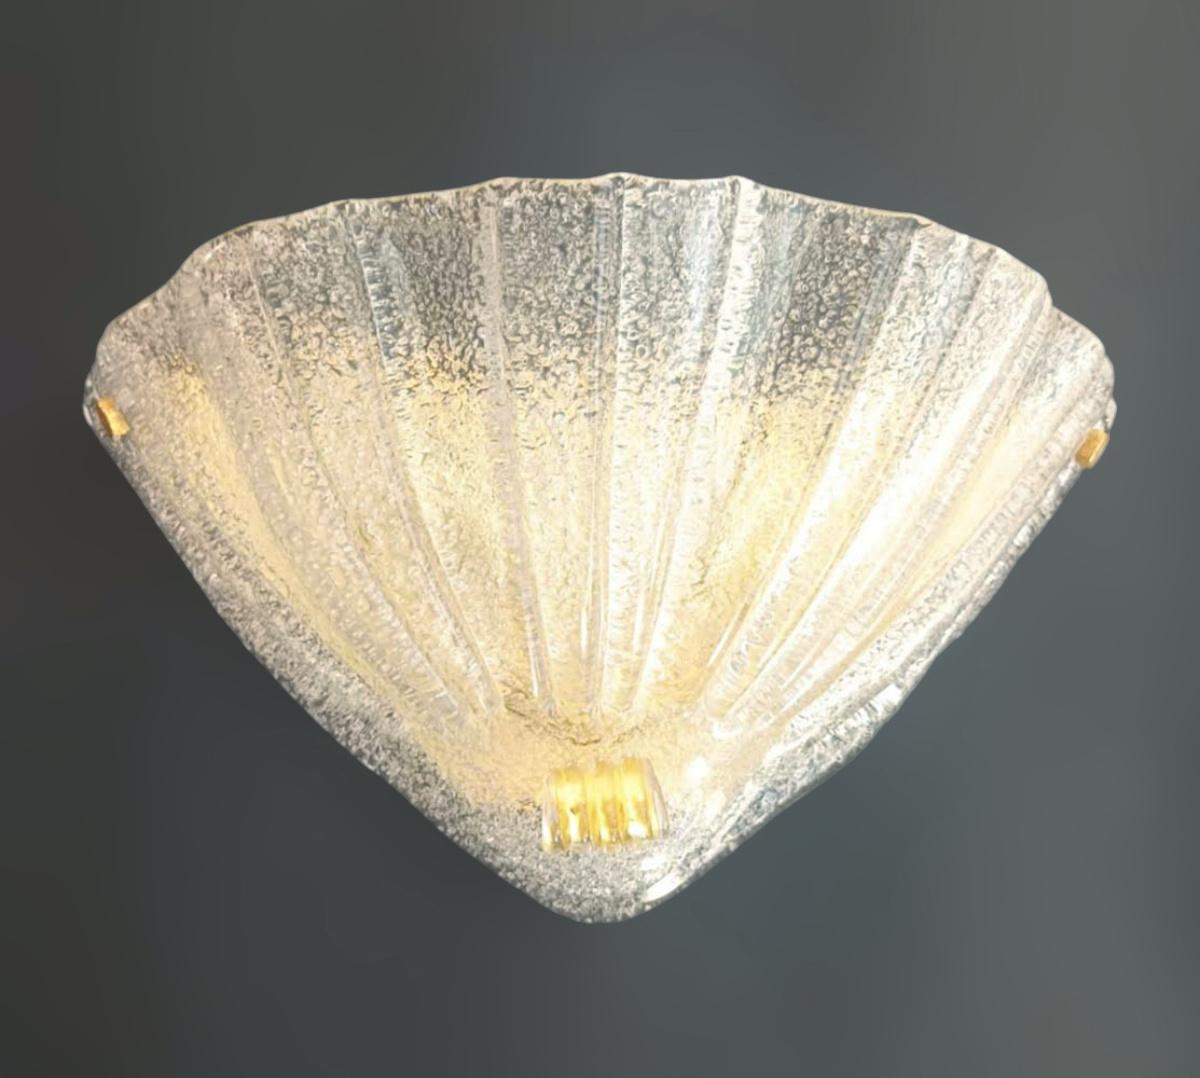 Vintage Italian uplight sconce with clear Murano glass shade hand blown using graniglia technique to produce granular textured effect / Made in Italy in the style of Barovier e Toso, circa 1960s
Measures: width 16 inches / Height 8 inches / Depth 6